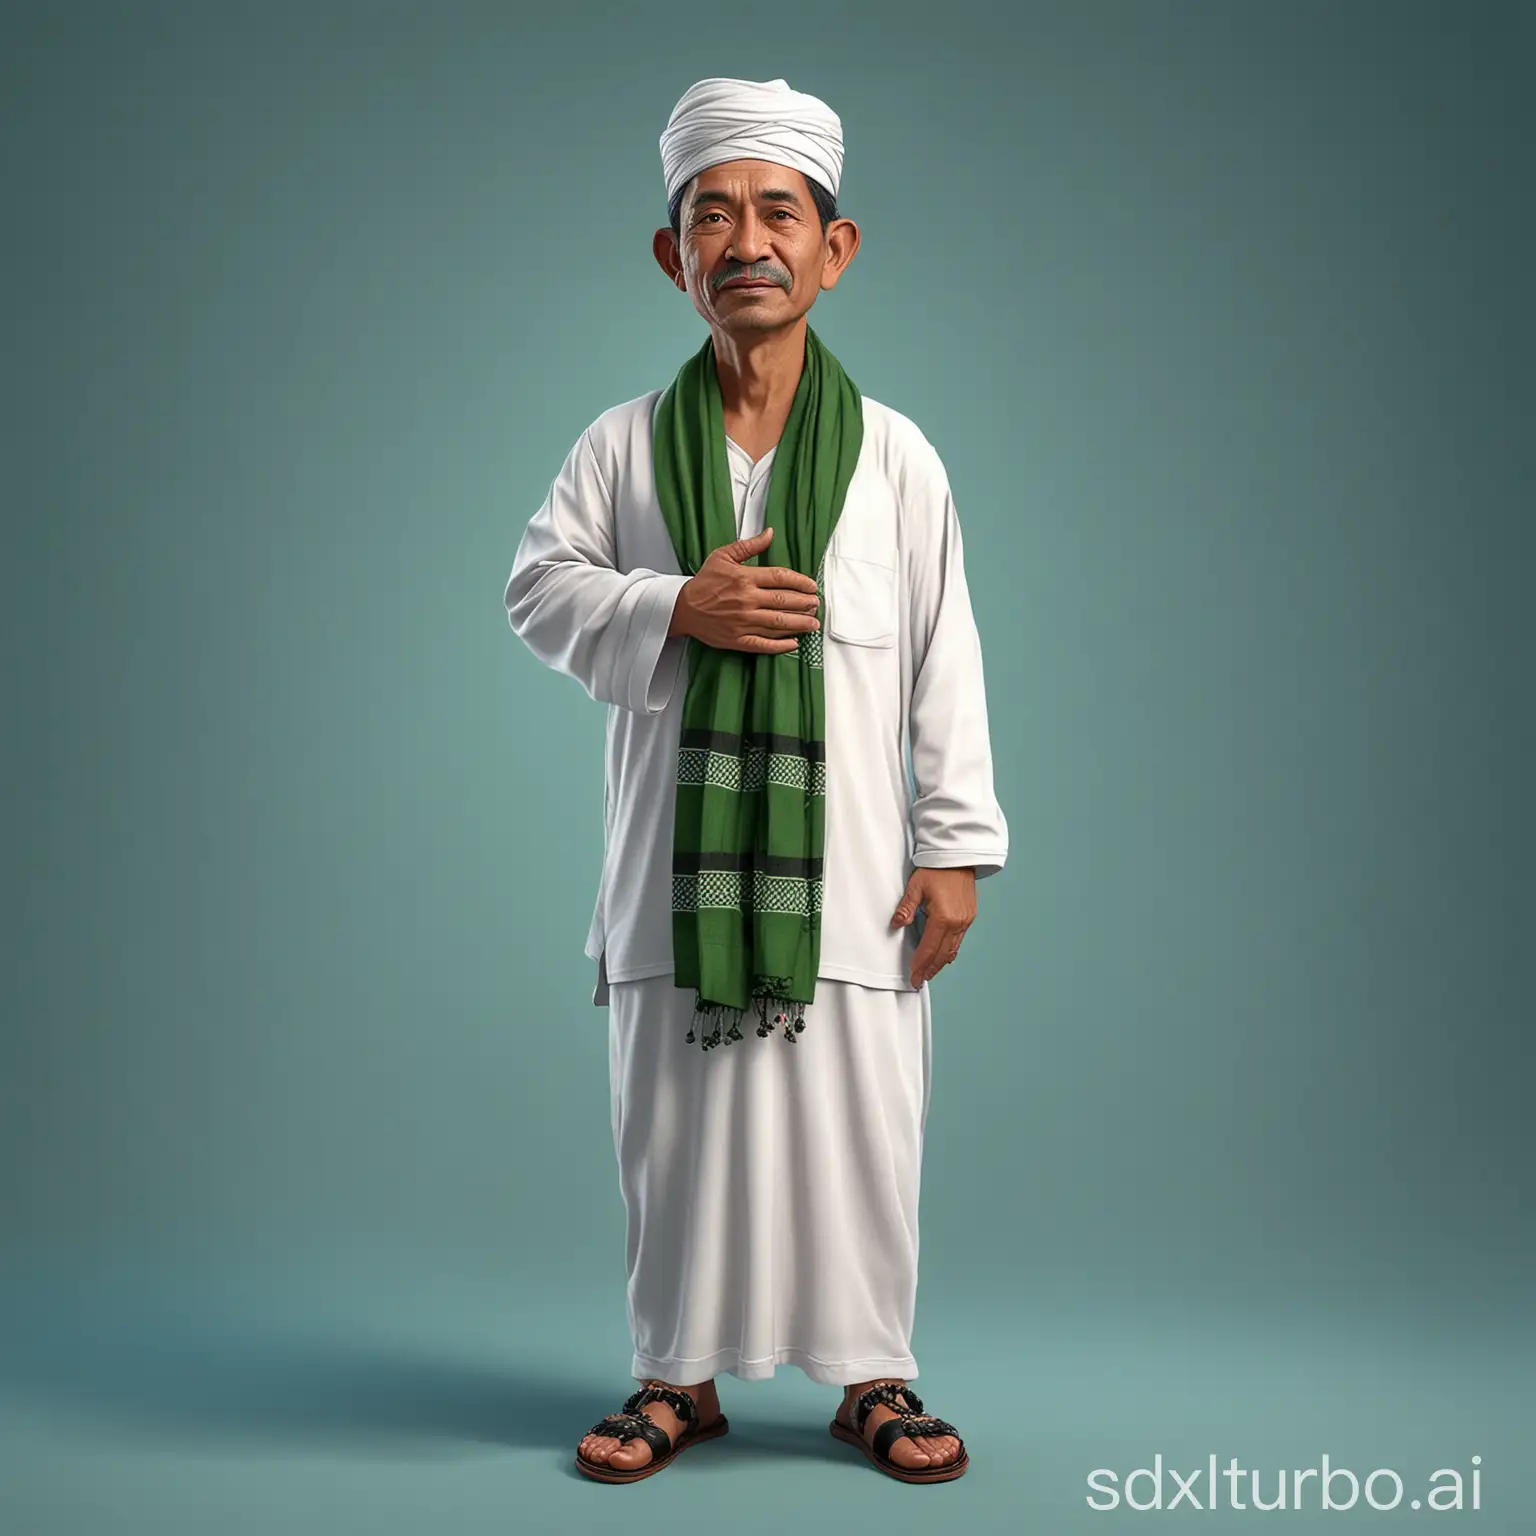 Detailed-Portrait-of-a-50YearOld-Indonesian-Man-in-Traditional-Attire-Praying-with-Prayer-Beads